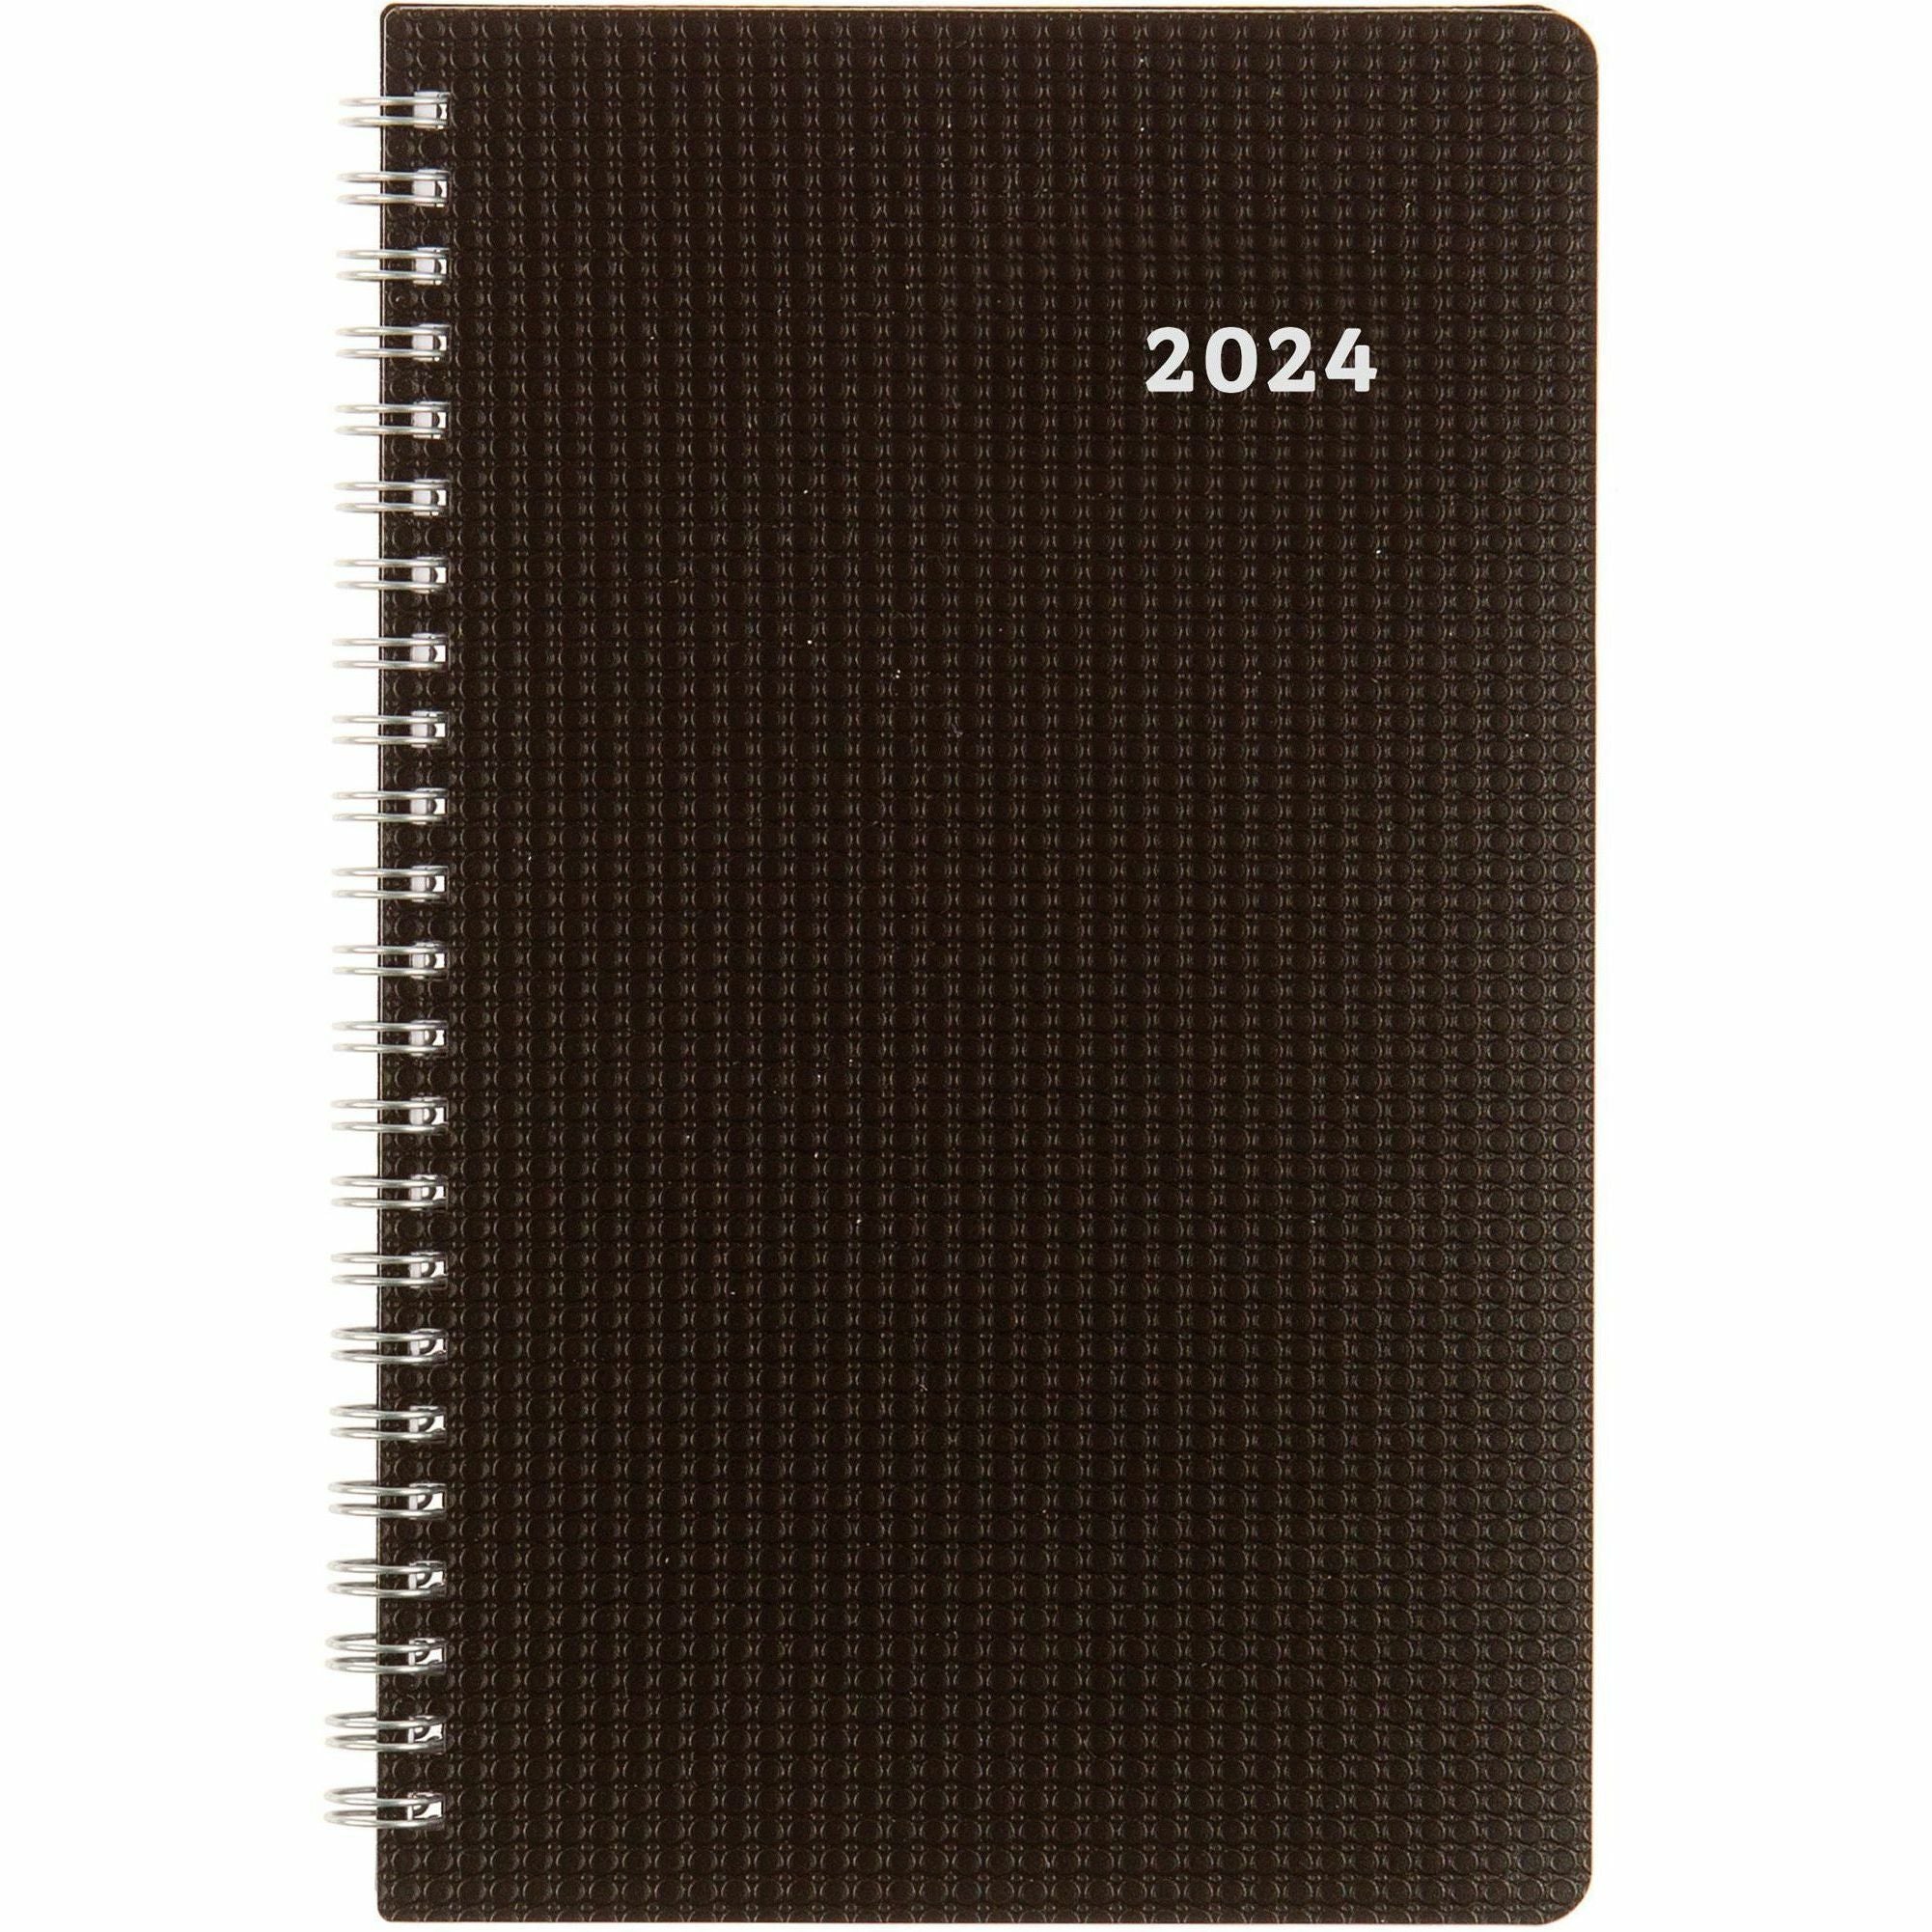 Brownline DuraFlex Weekly Appointment Book - Julian Dates - Weekly - 12 Month - January 2024 - December 2024 - 7:00 AM to 6:00 PM - Hourly - 1 Week Double Page Layout - 5" x 8" Sheet Size - Twin Wire - Black - Poly - Textured Cover, Moon Phases, Refe - 